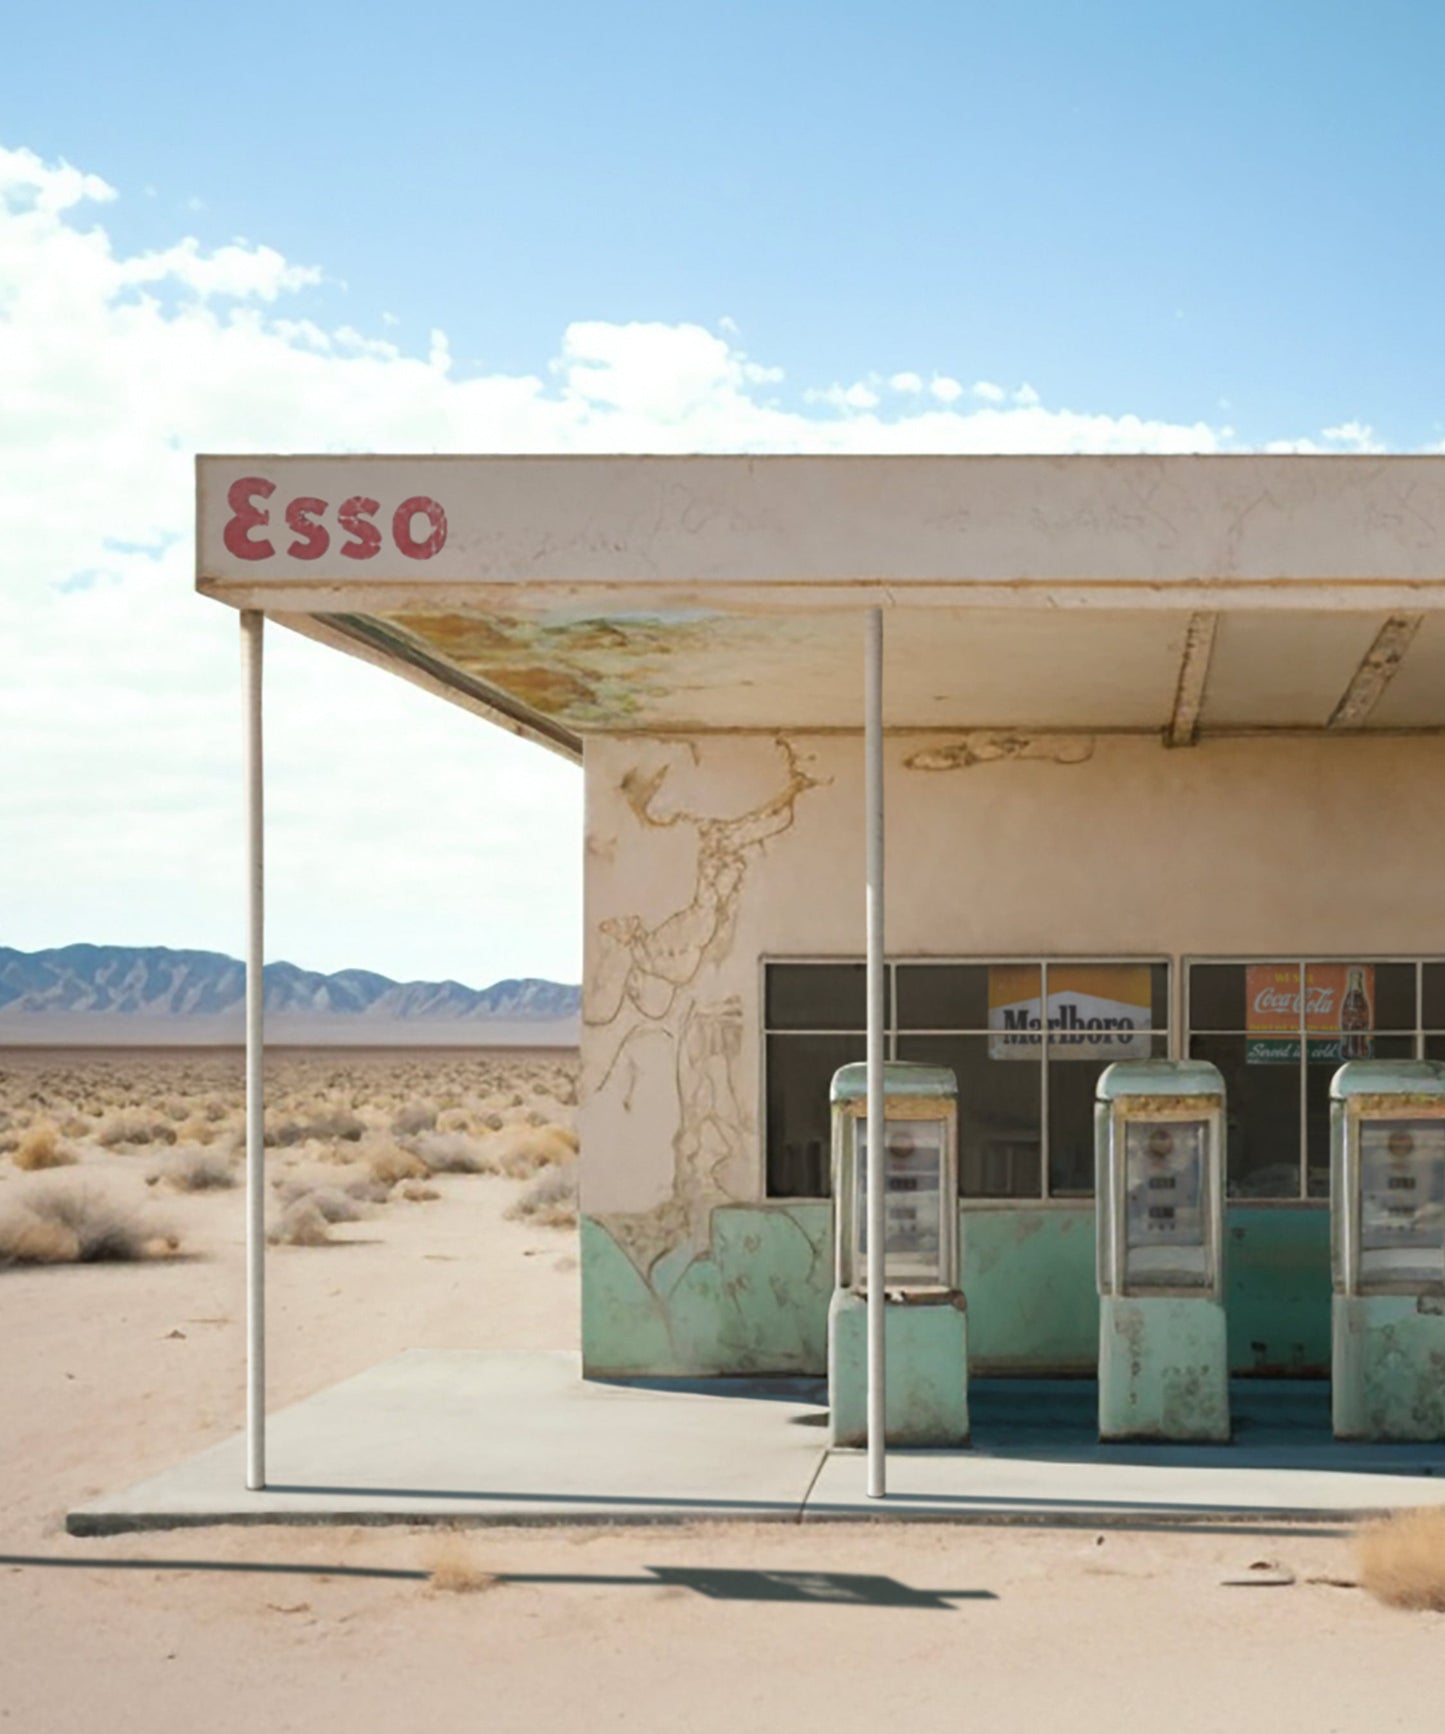 Roadside Remains #4 of 6 - The Esso